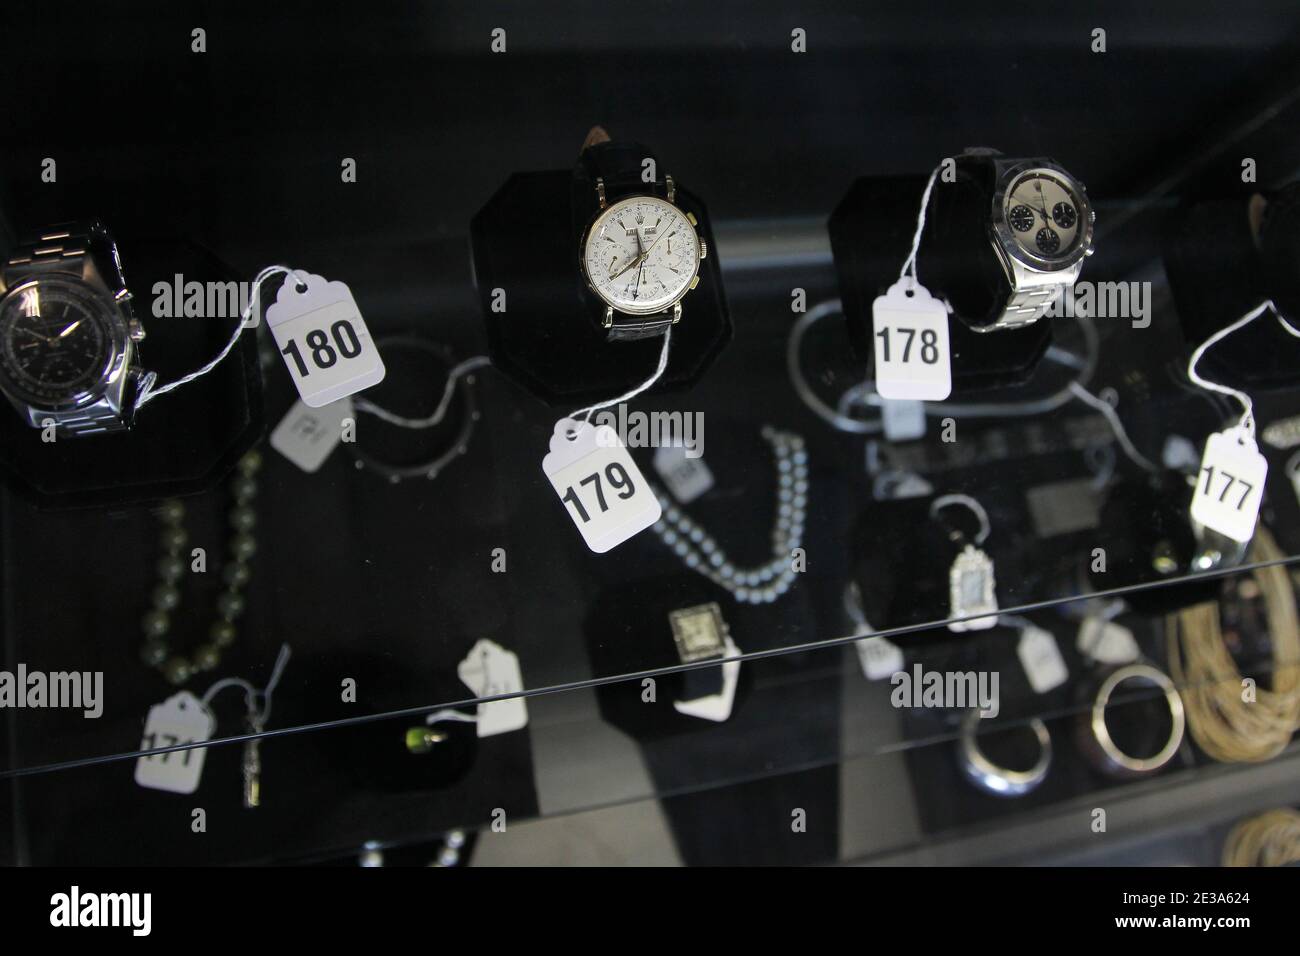 Watches and jewellery are displayed during a press preview of a U.S. Marshals Service auction of personal property seized from Bernard and Ruth Madoff New York City, NY, USA on November 10, 2010. Photo by Elizabeth Pantaleo/ABACAPRESS.COM Stock Photo